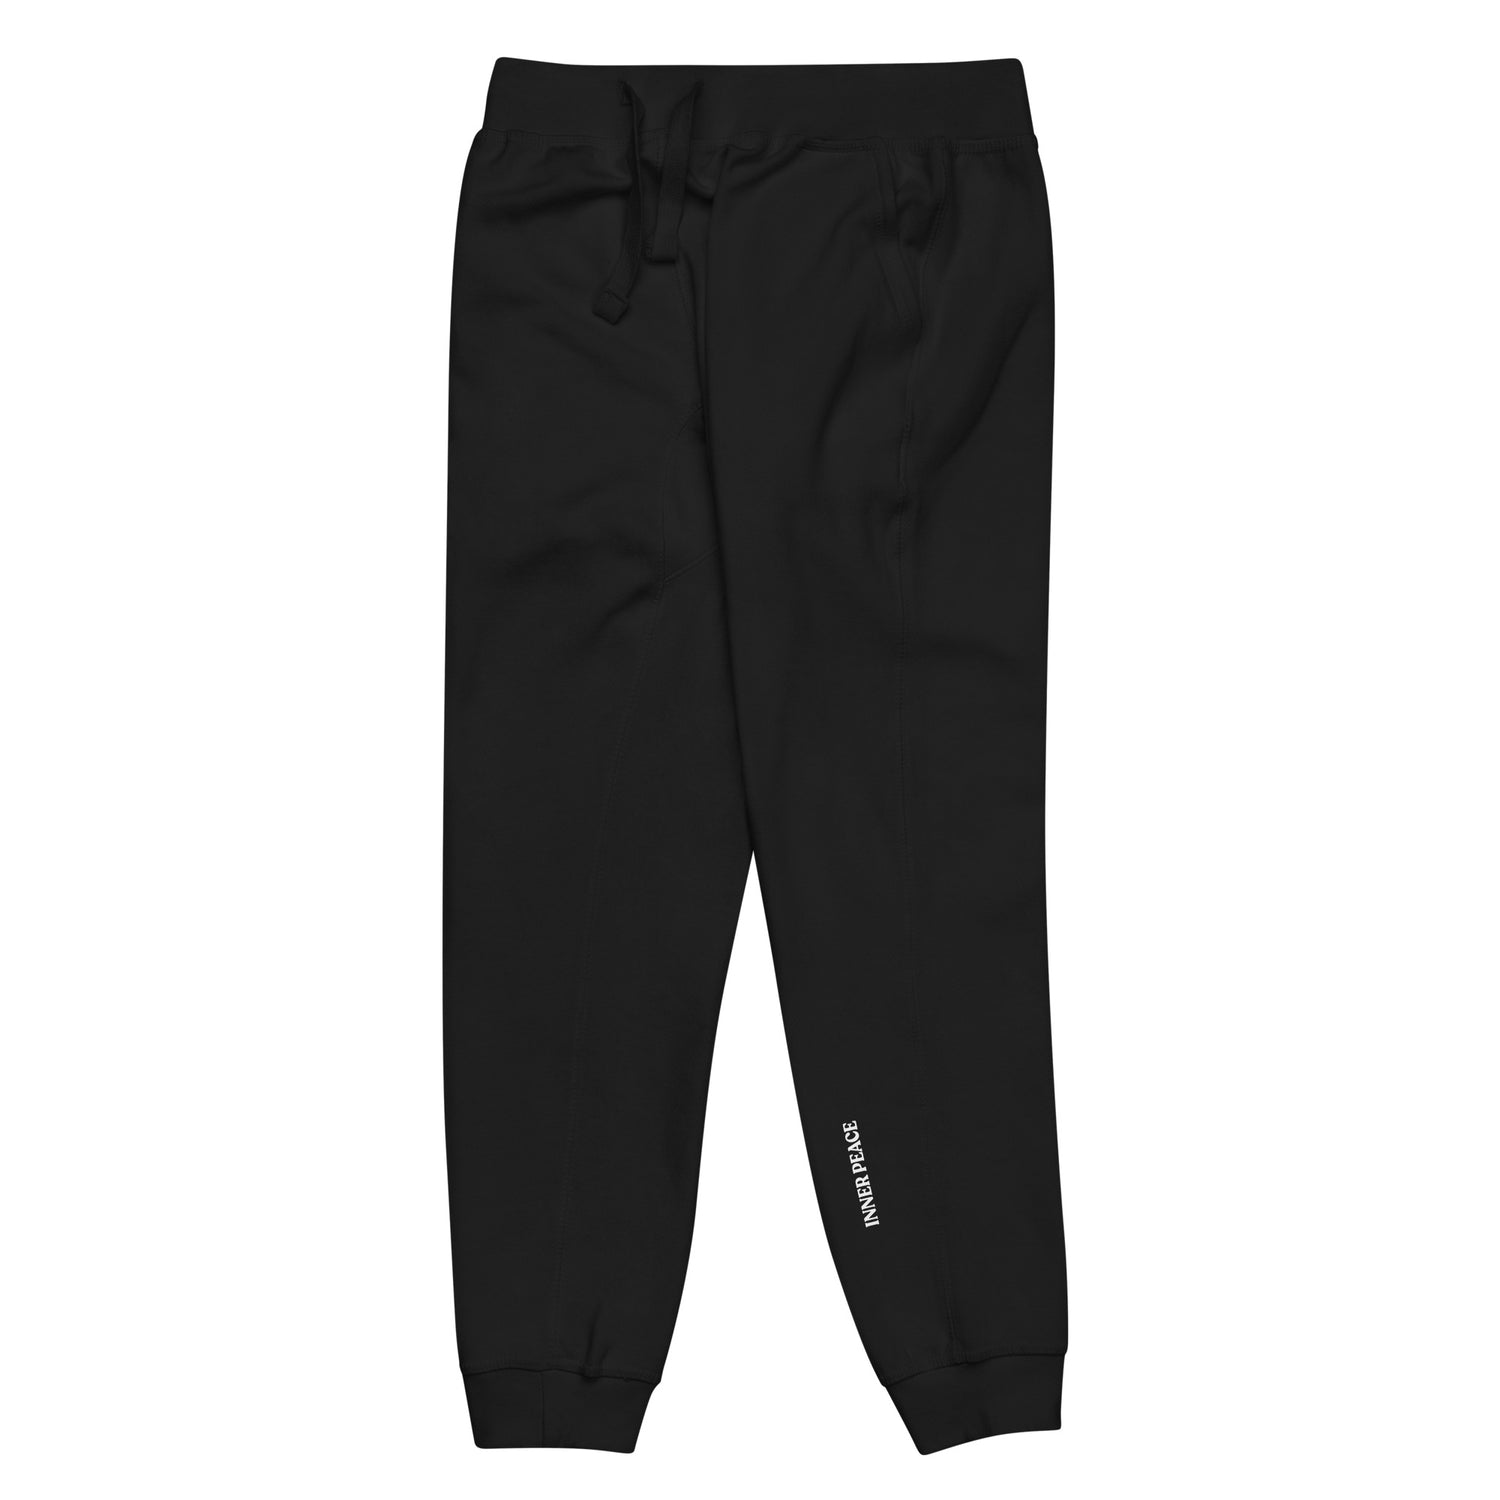 Side of black sweat pant featuring " Inner peace' printed on left lower leg.